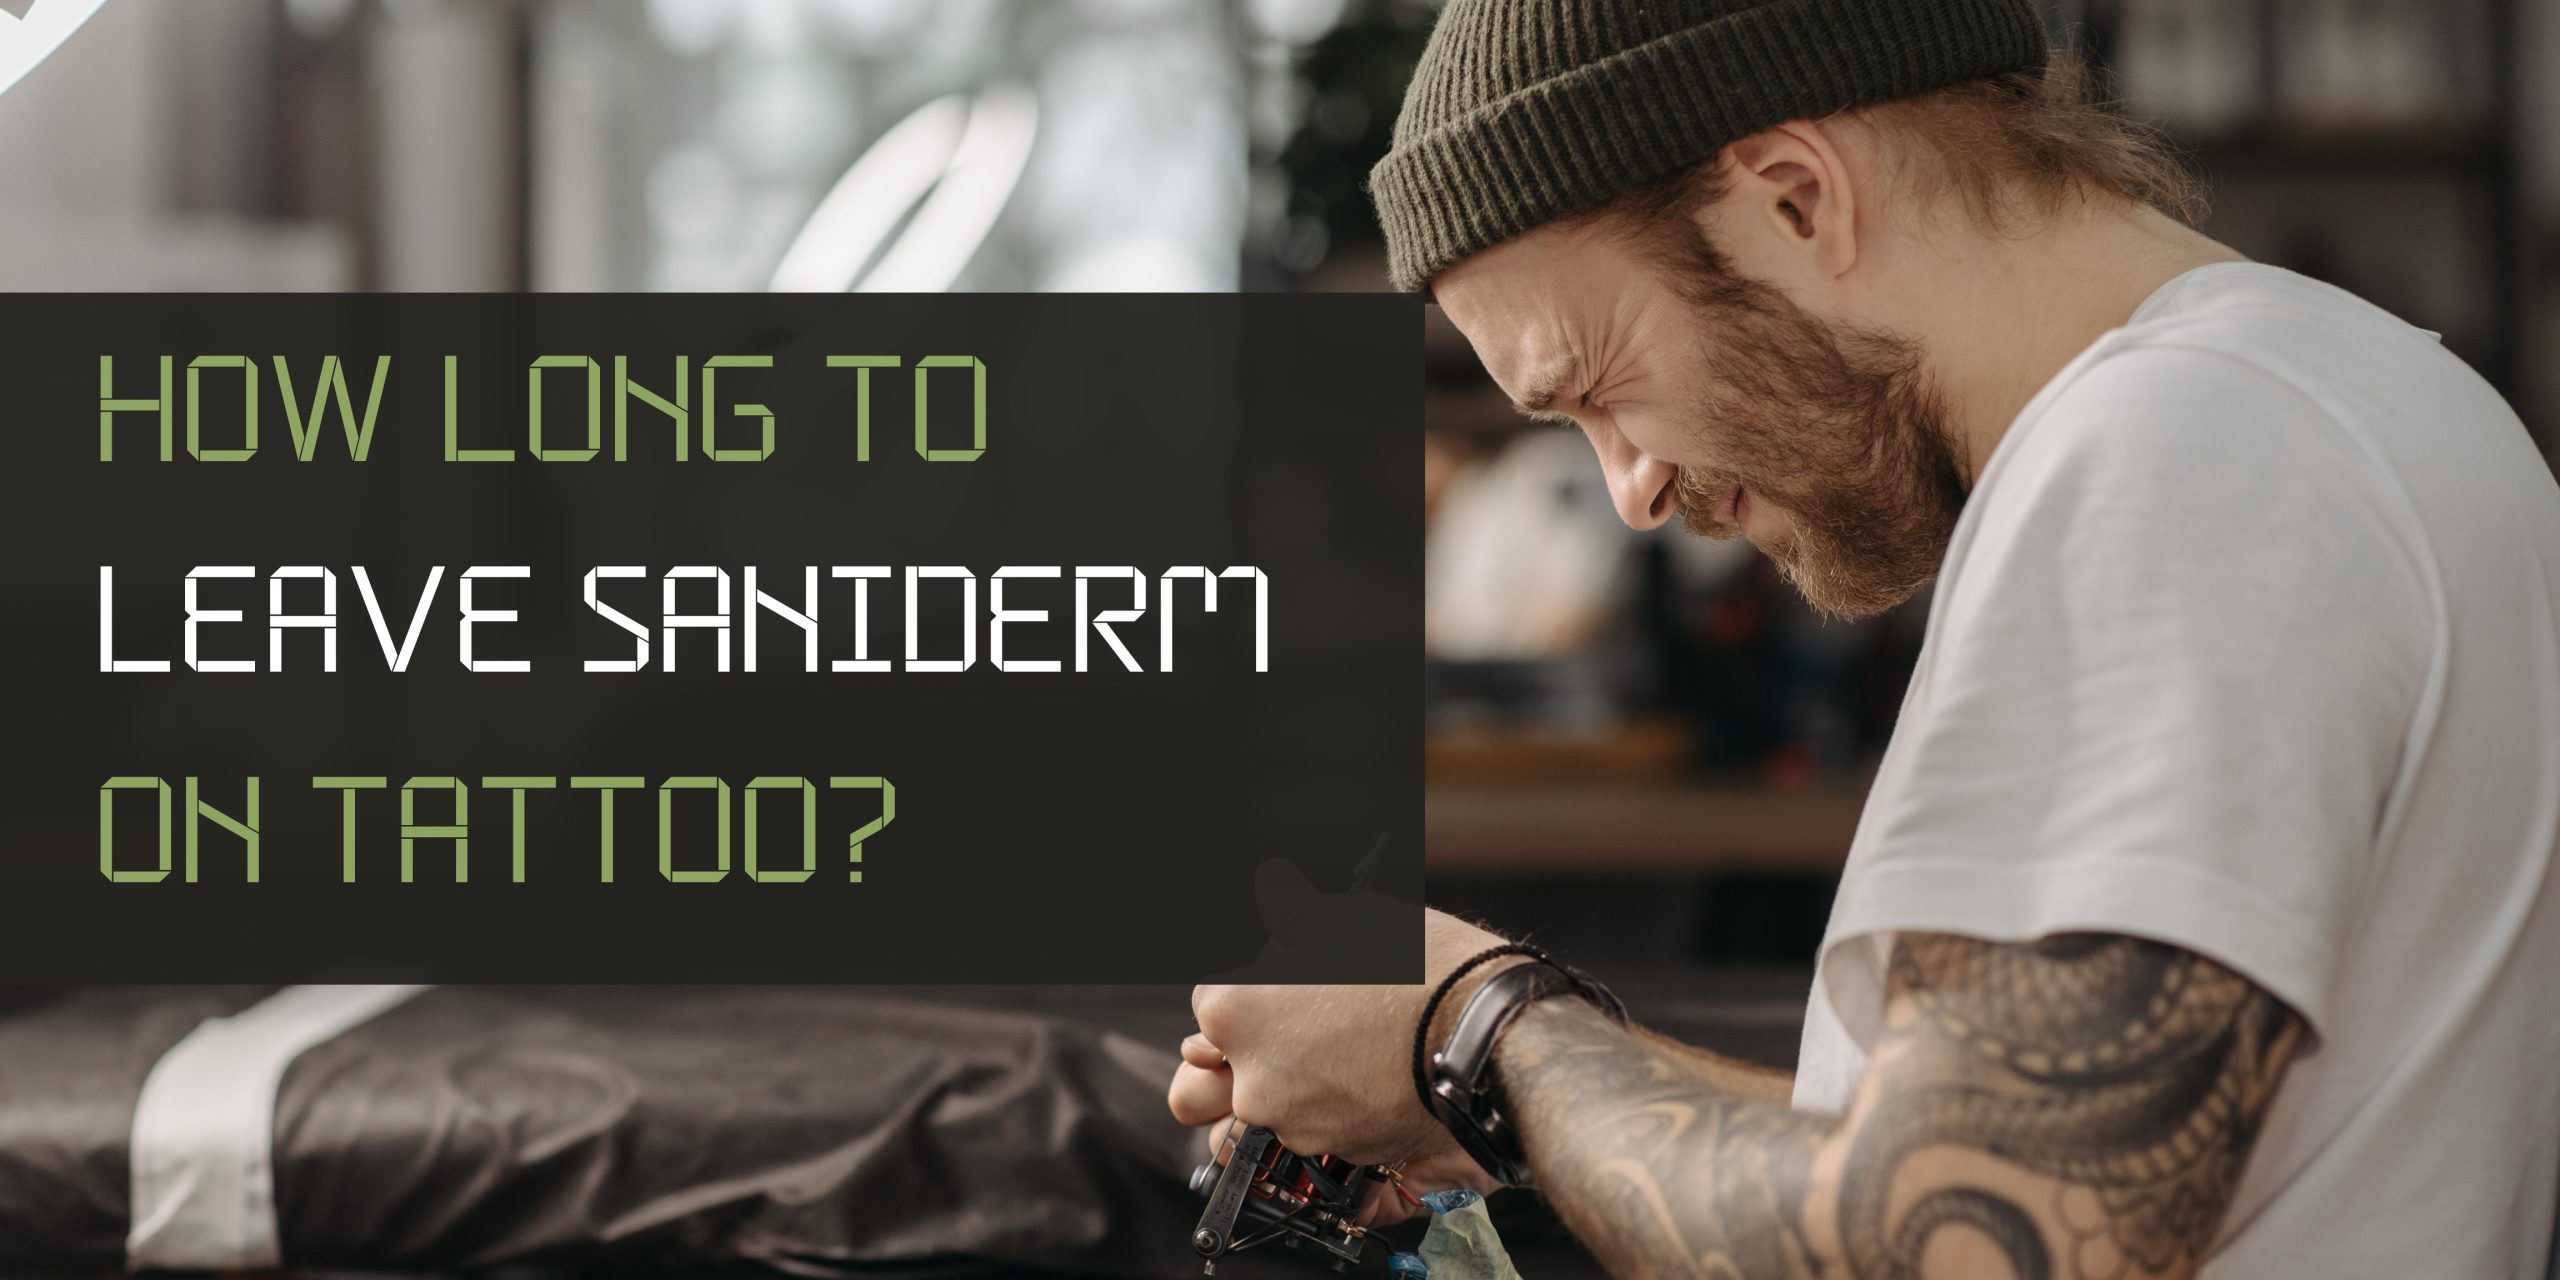 How Long To Leave Saniderm On Tattoo